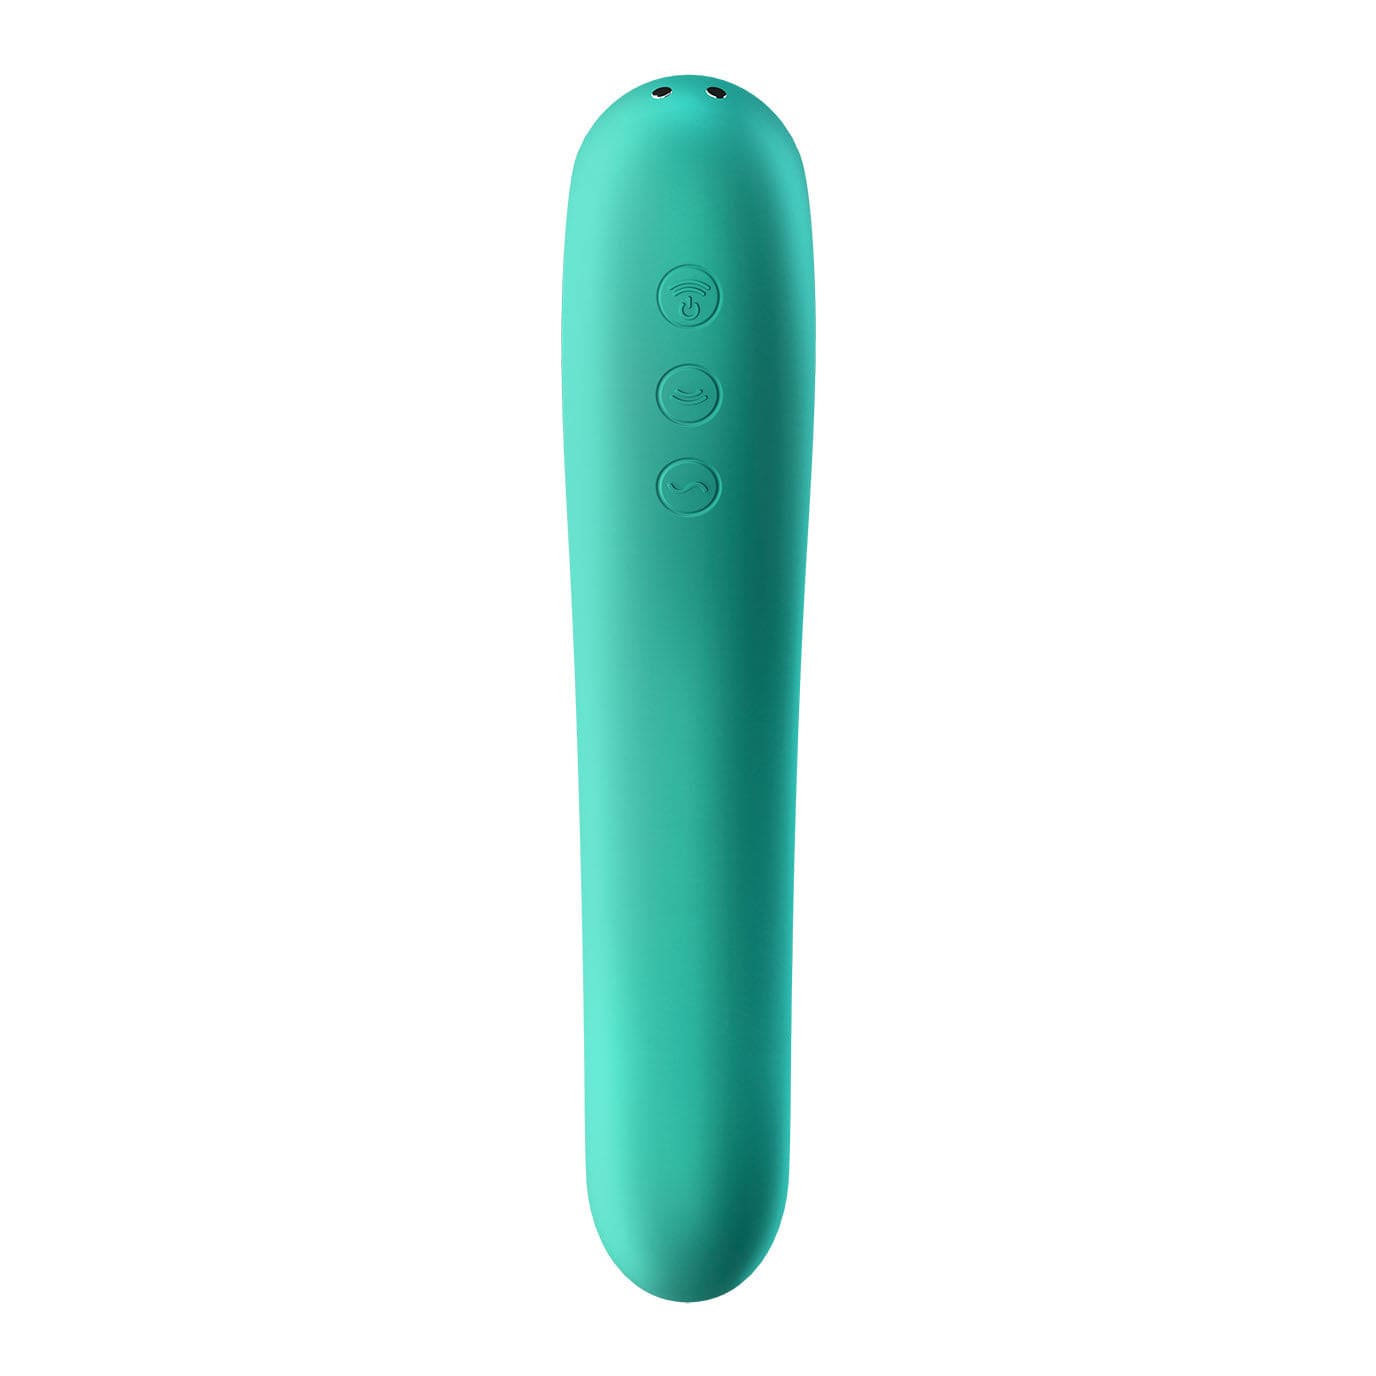 Satisfyer - Dual Kiss Insertable Air Pulse Vibrator w App-Controlled Clitoral Air Stimulator (Green) Clit Massager (Vibration) Rechargeable 4061504003016 CherryAffairs